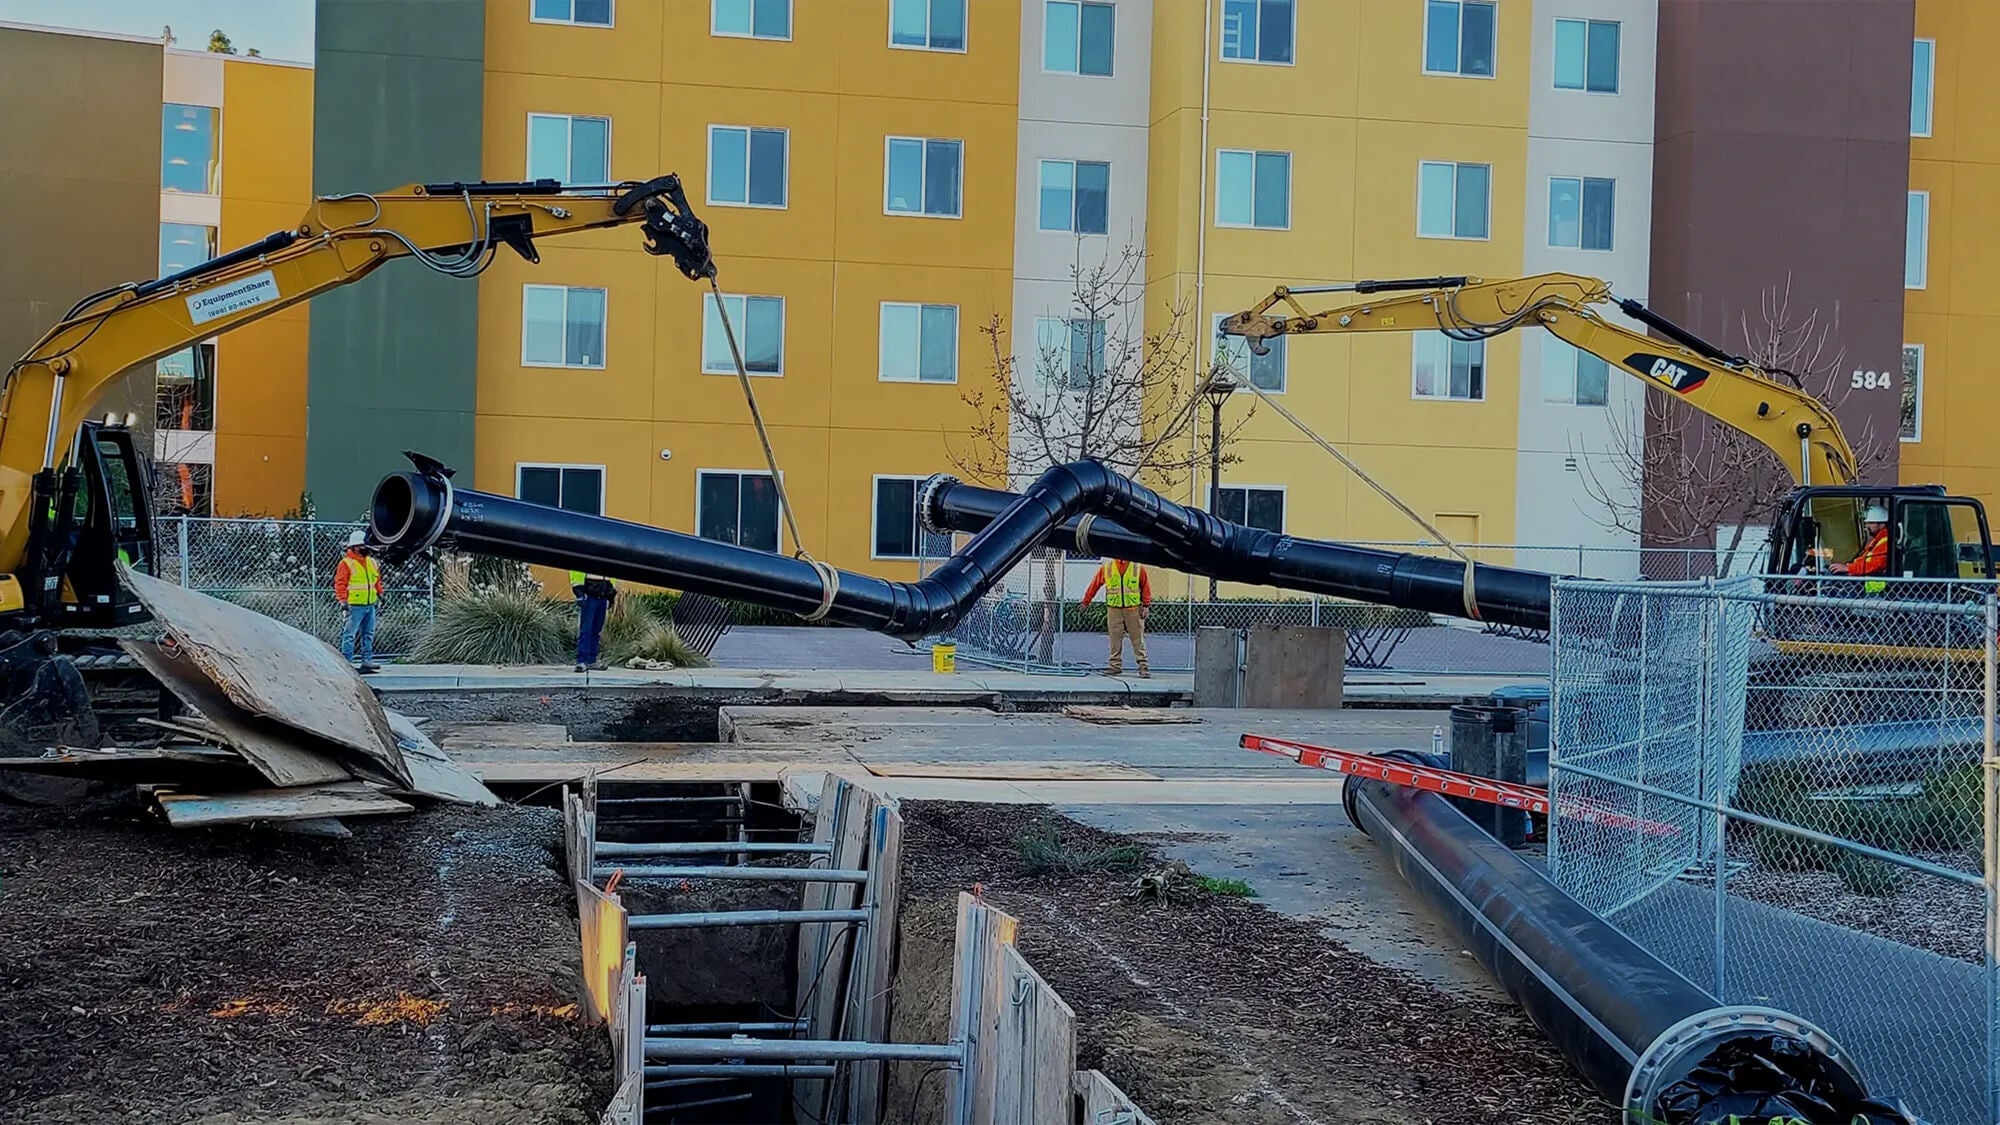 Large underground pipes are installed to help meet campus sustainability goals. The Fossil Fuel-Free Pathway Plan aims to slash 95% of its 2019 fossil fuel use by 2040. (UC Davis)